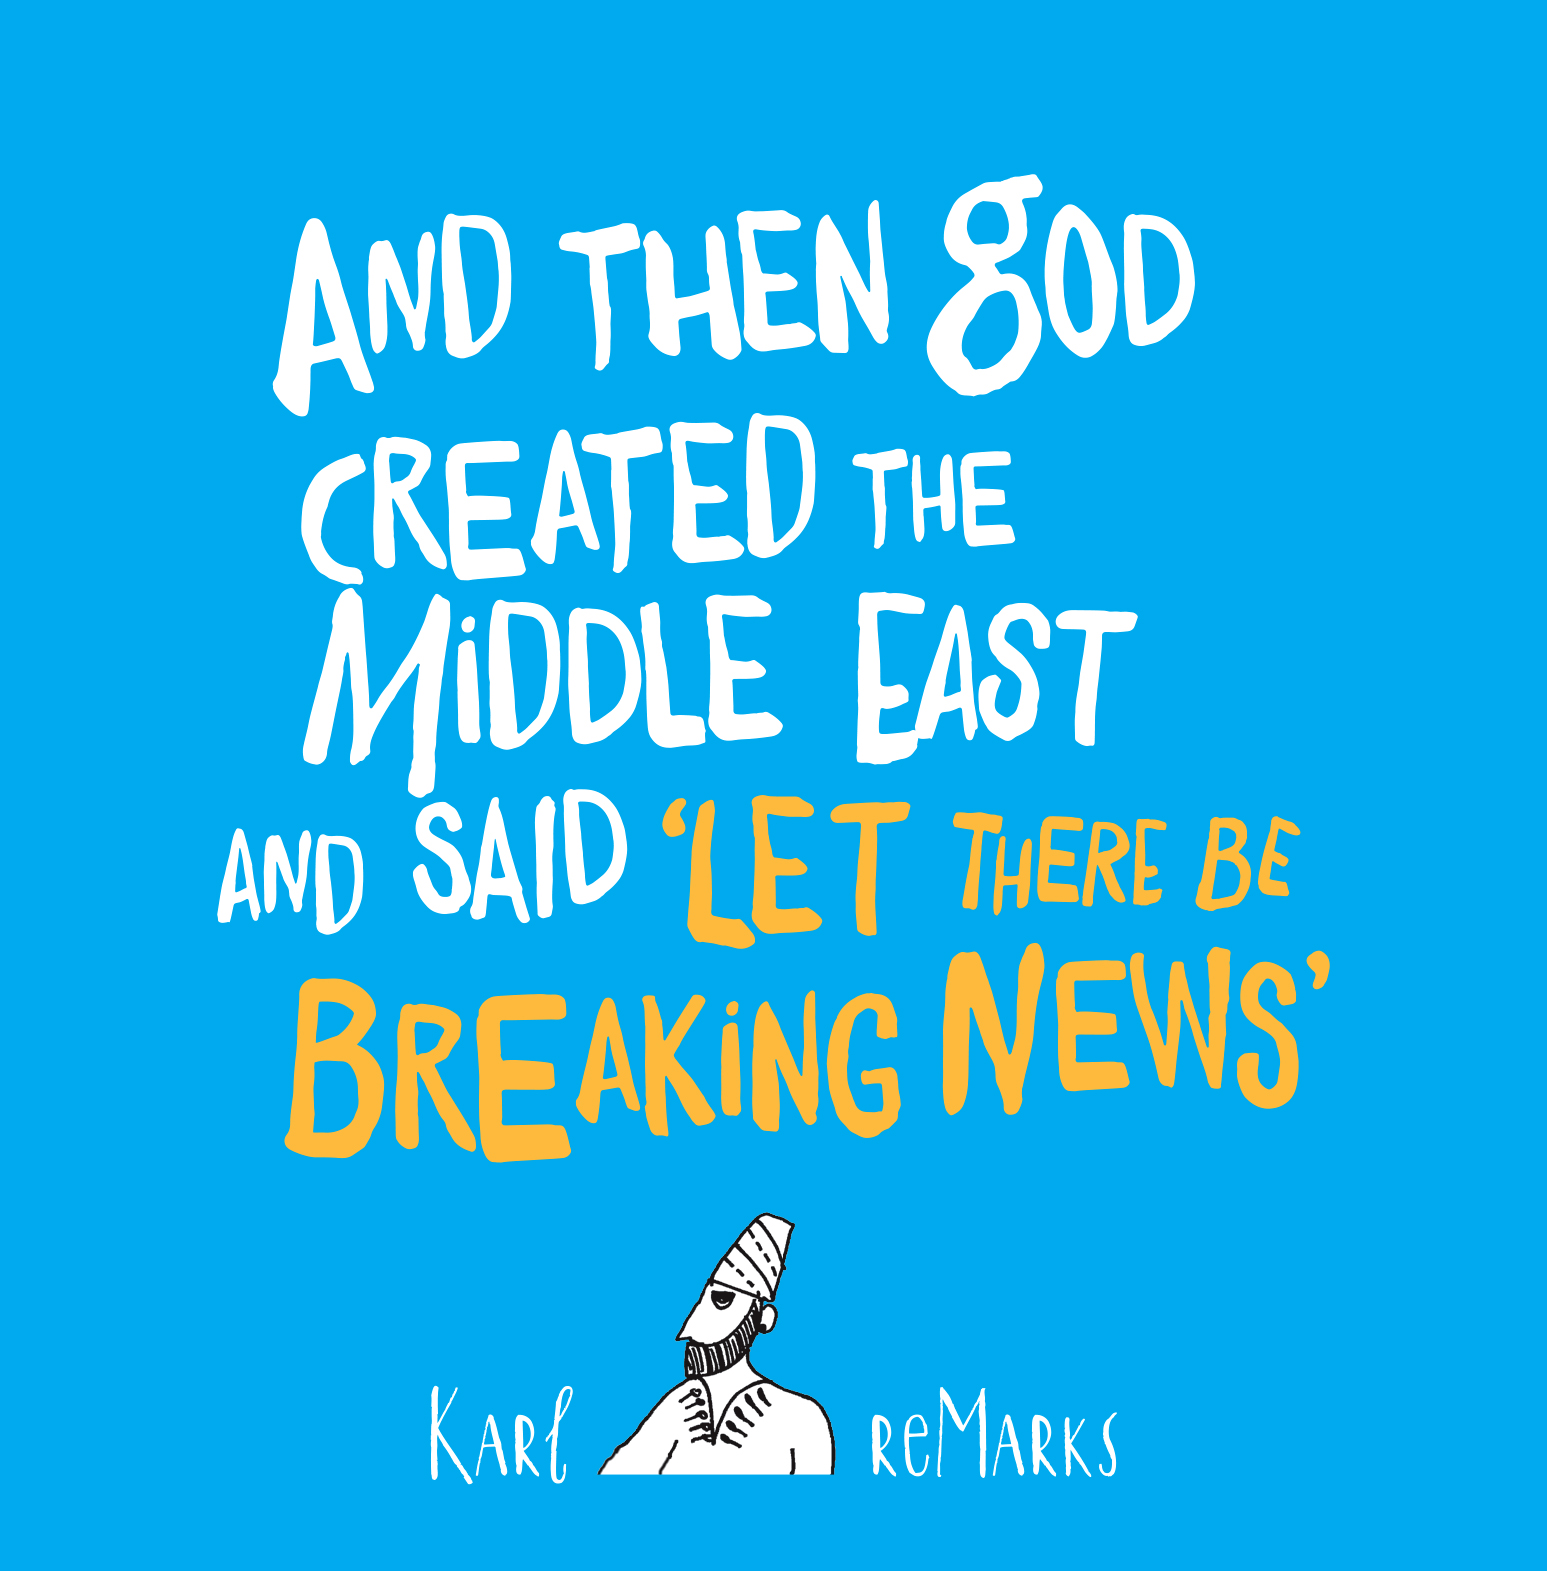 Buchcover Karl Sharro: "And Then God Created the Middle East and Said ʹLet There be Breaking Newsʹ"; Quelle: Saqi Books